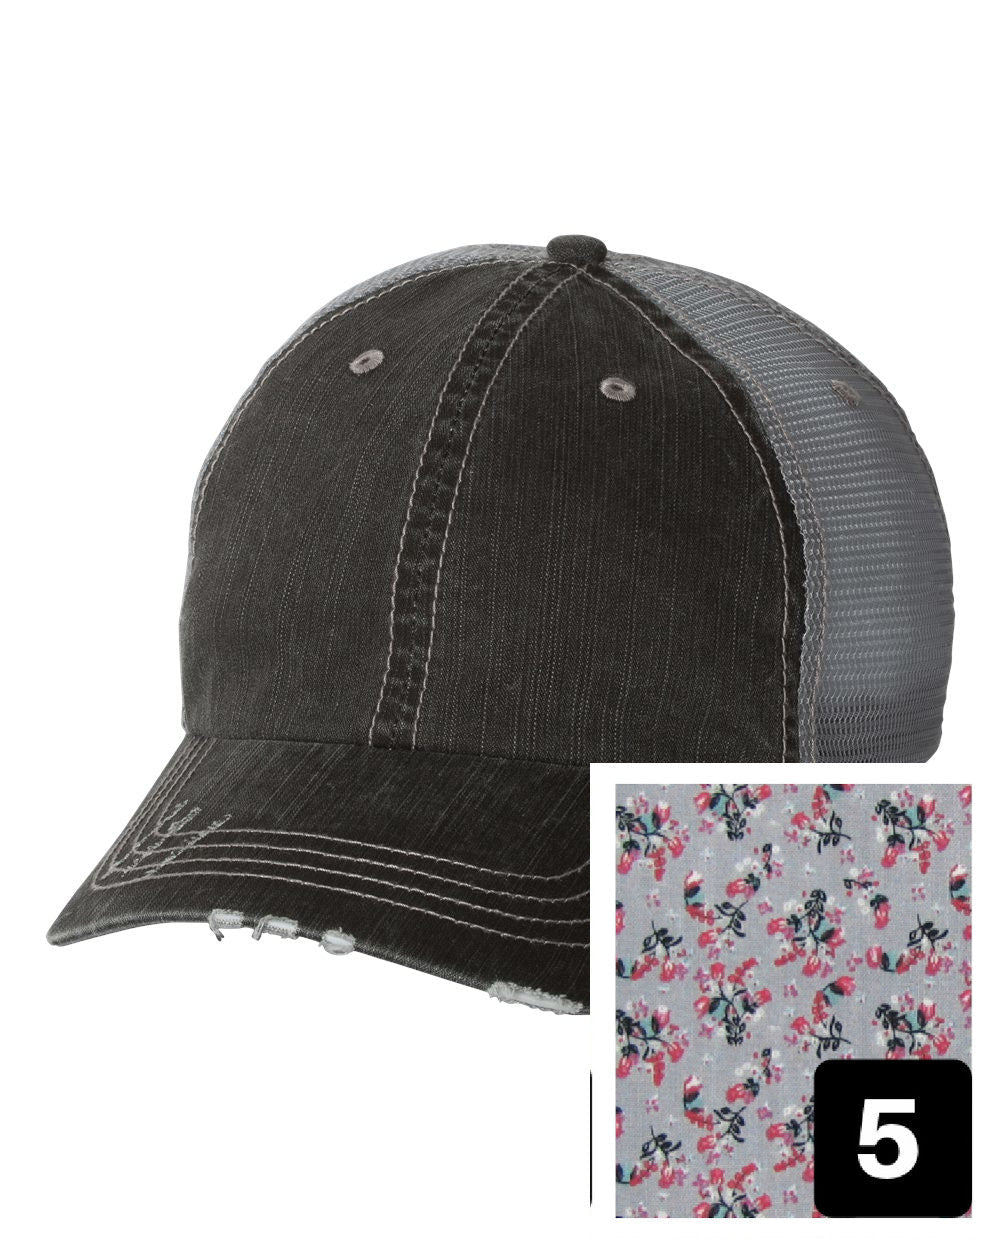 gray distressed trucker hat with purple and pink floral fabric state of Nebraska